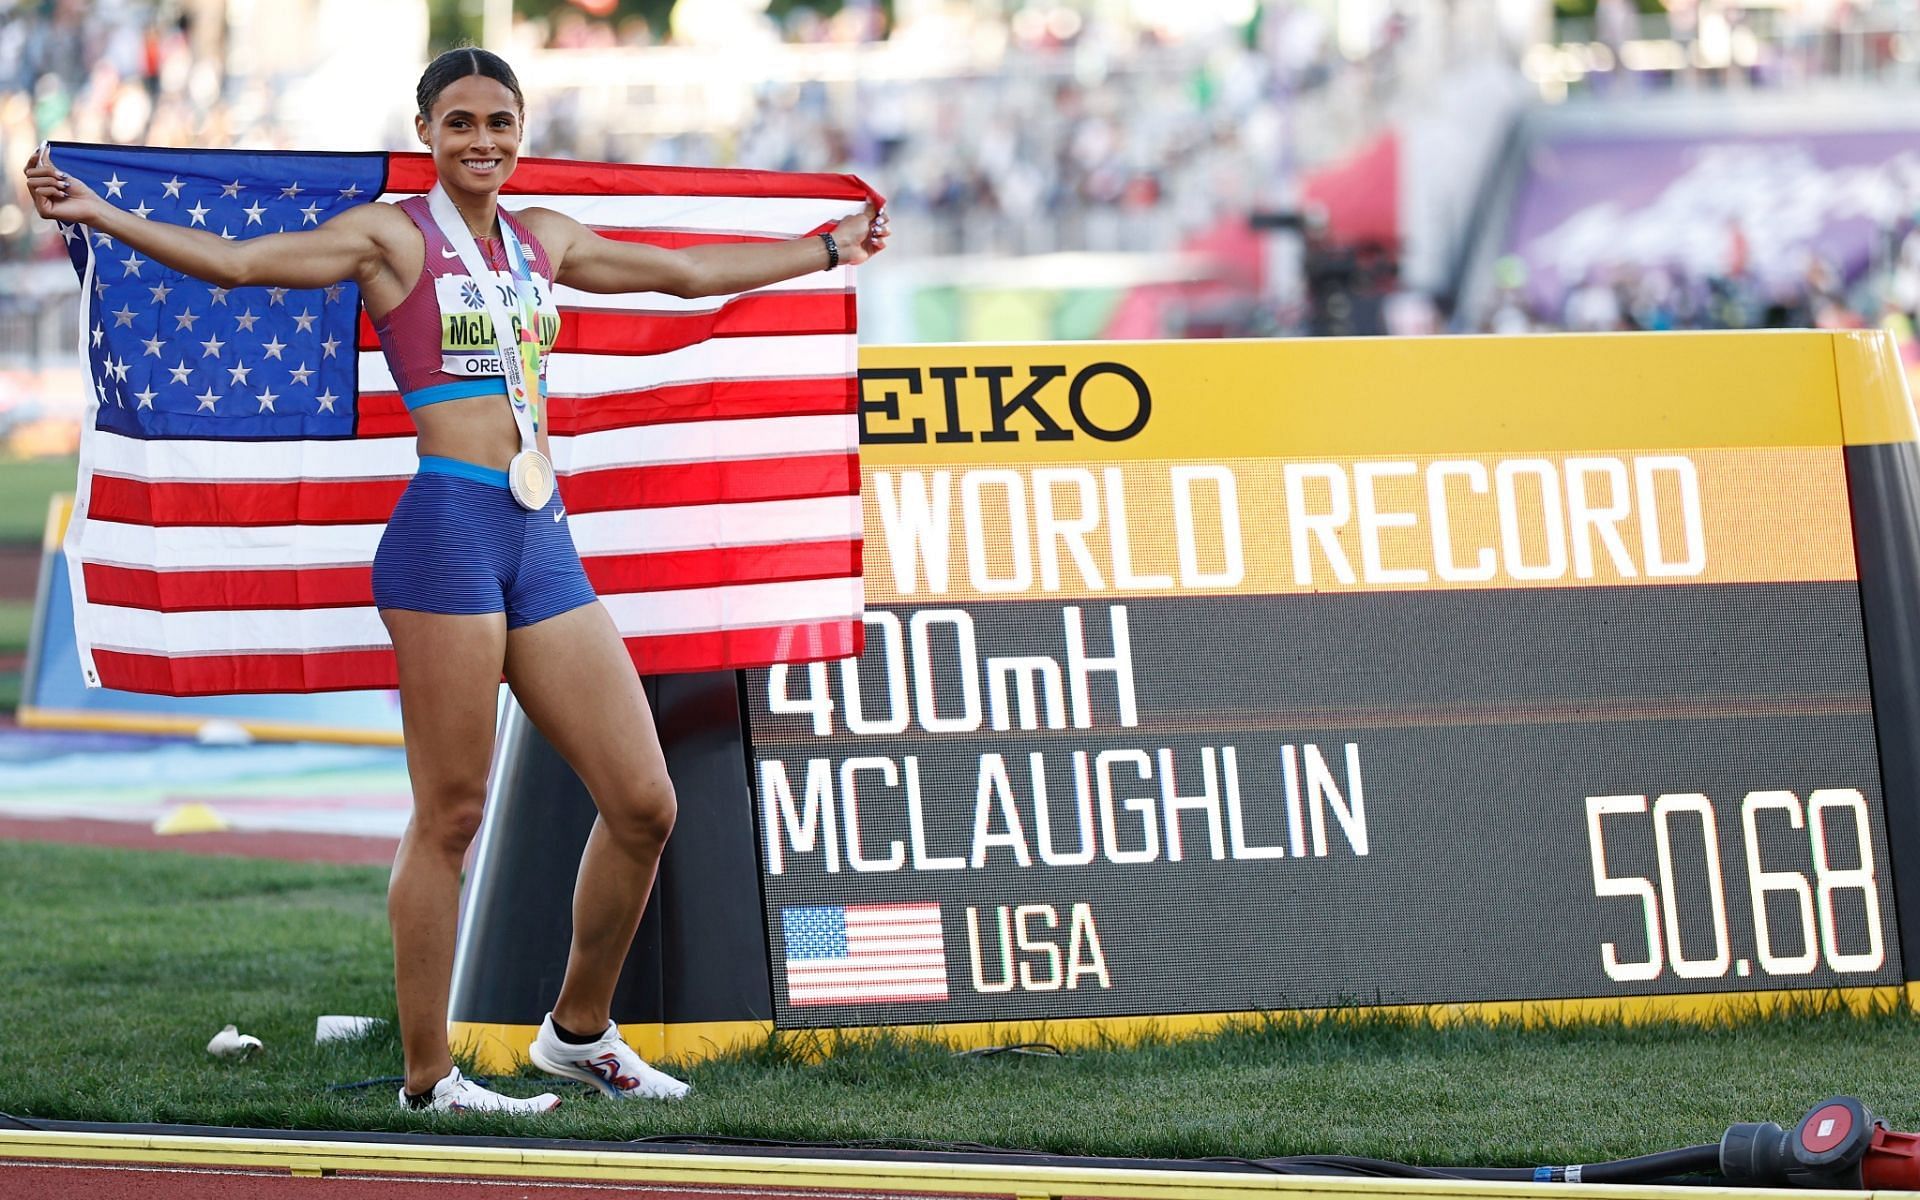 Sydney McLaughlin creates world record in the 400 Meters Hurdles category at the World Athletics Championships 2022 (Image via World Athletics)